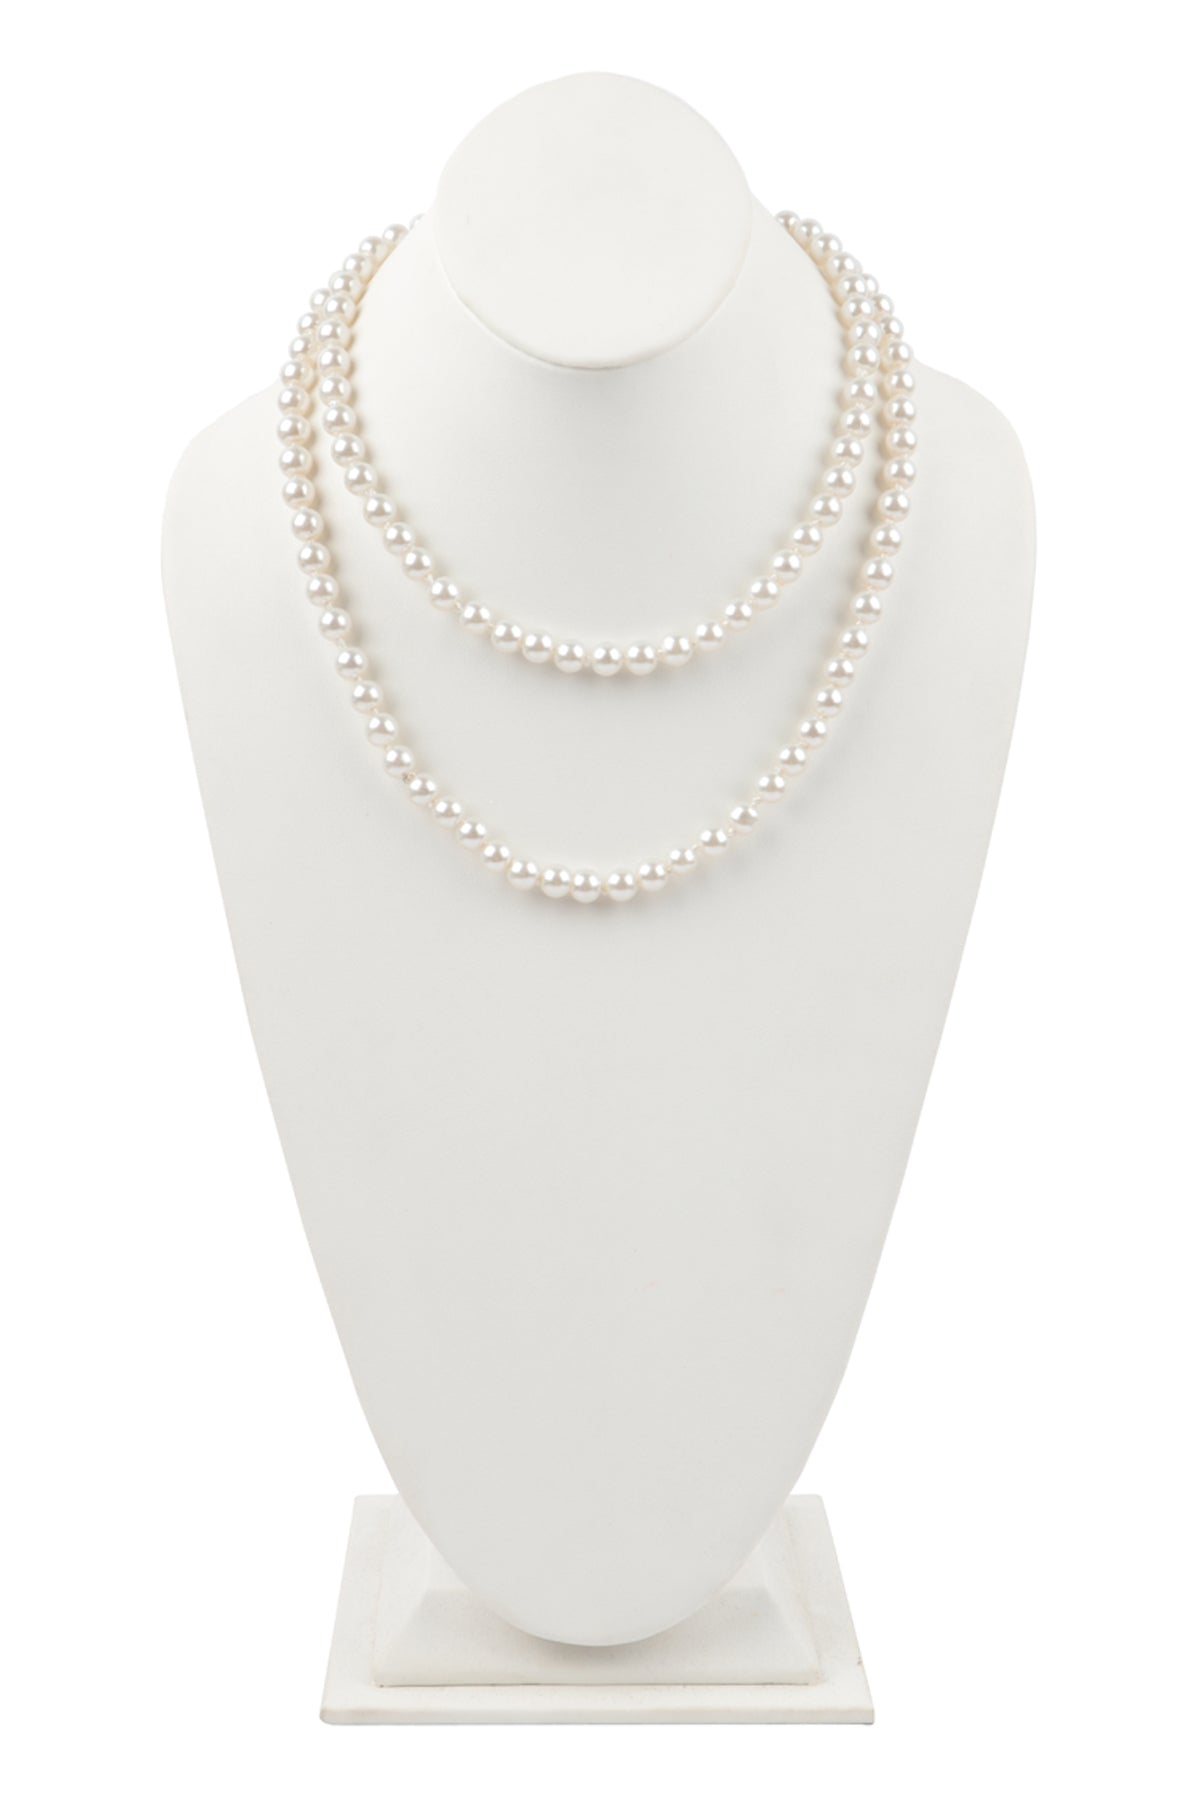 2 LINE PEARL BEADS SHORT NECKLACE-CREAM